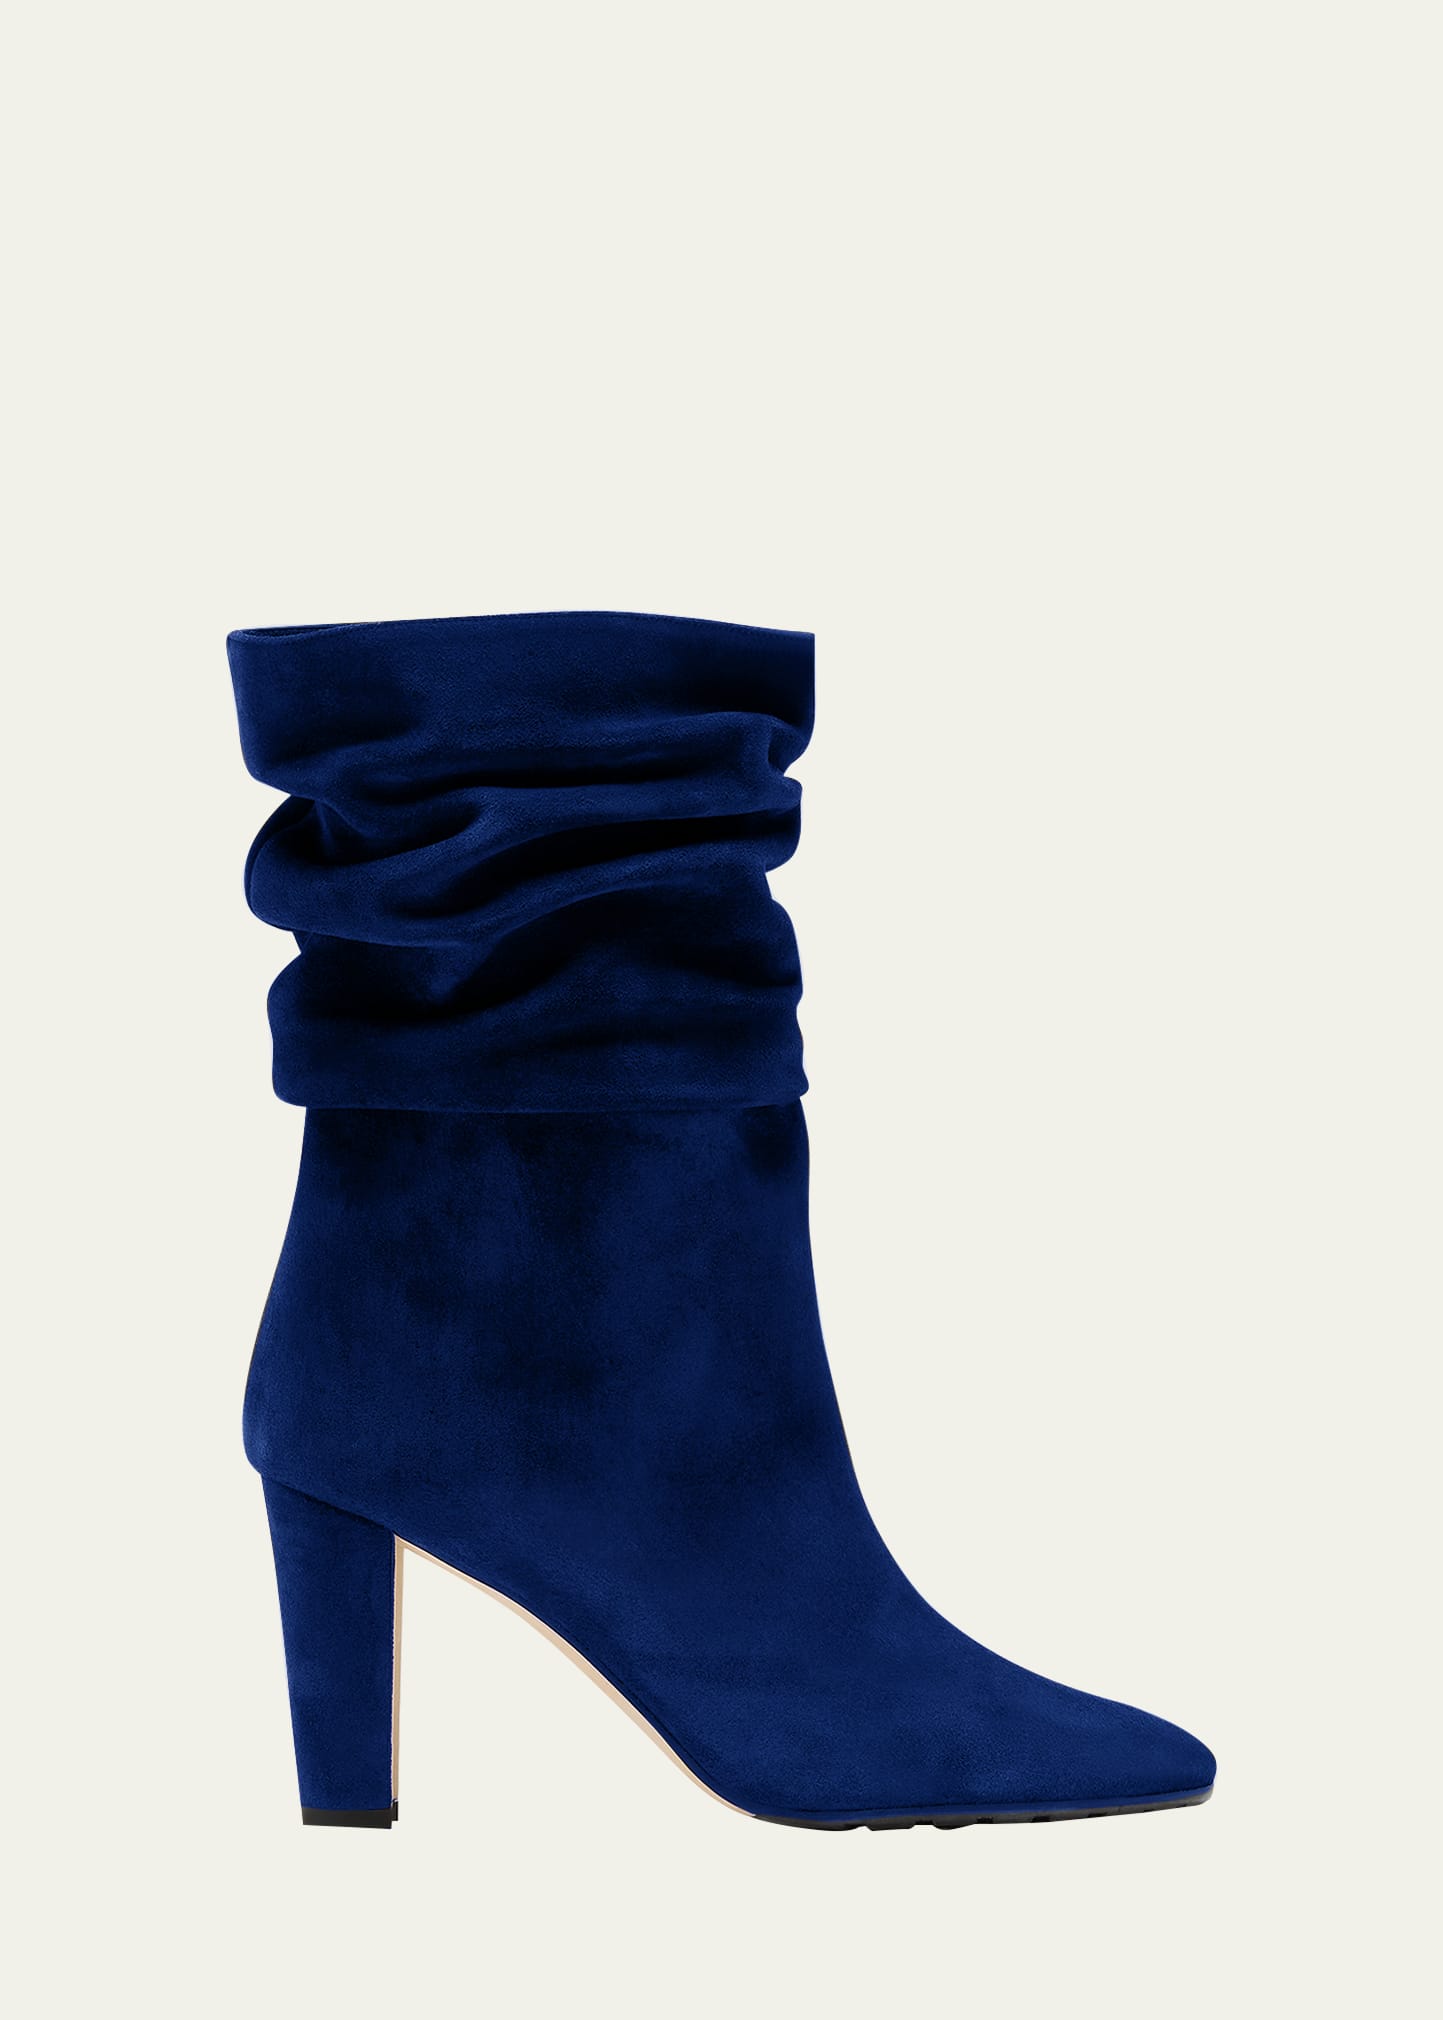 Manolo Blahnik Calasso Suede Slouchy Ankle Booties In Navy4109